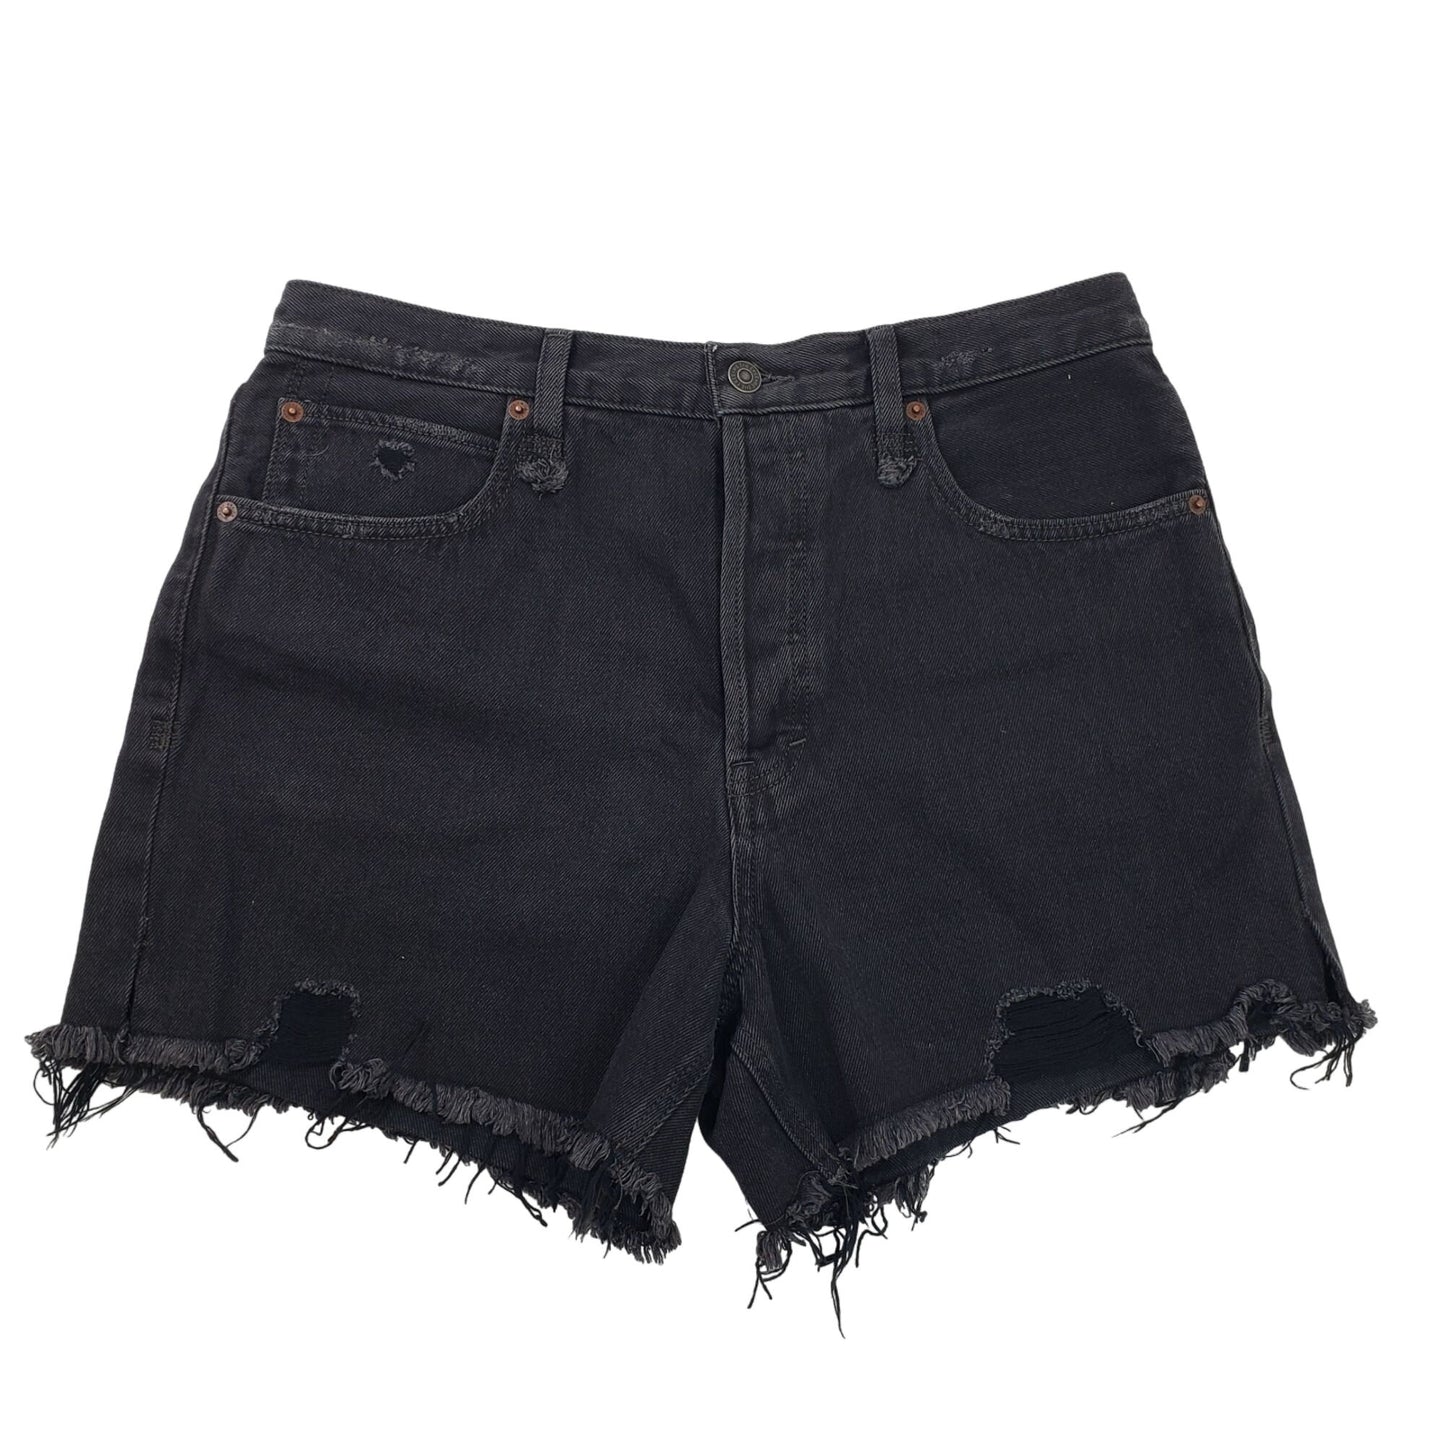 Free People We the Free High Rise Button Fly Distressed Shorts Size 30